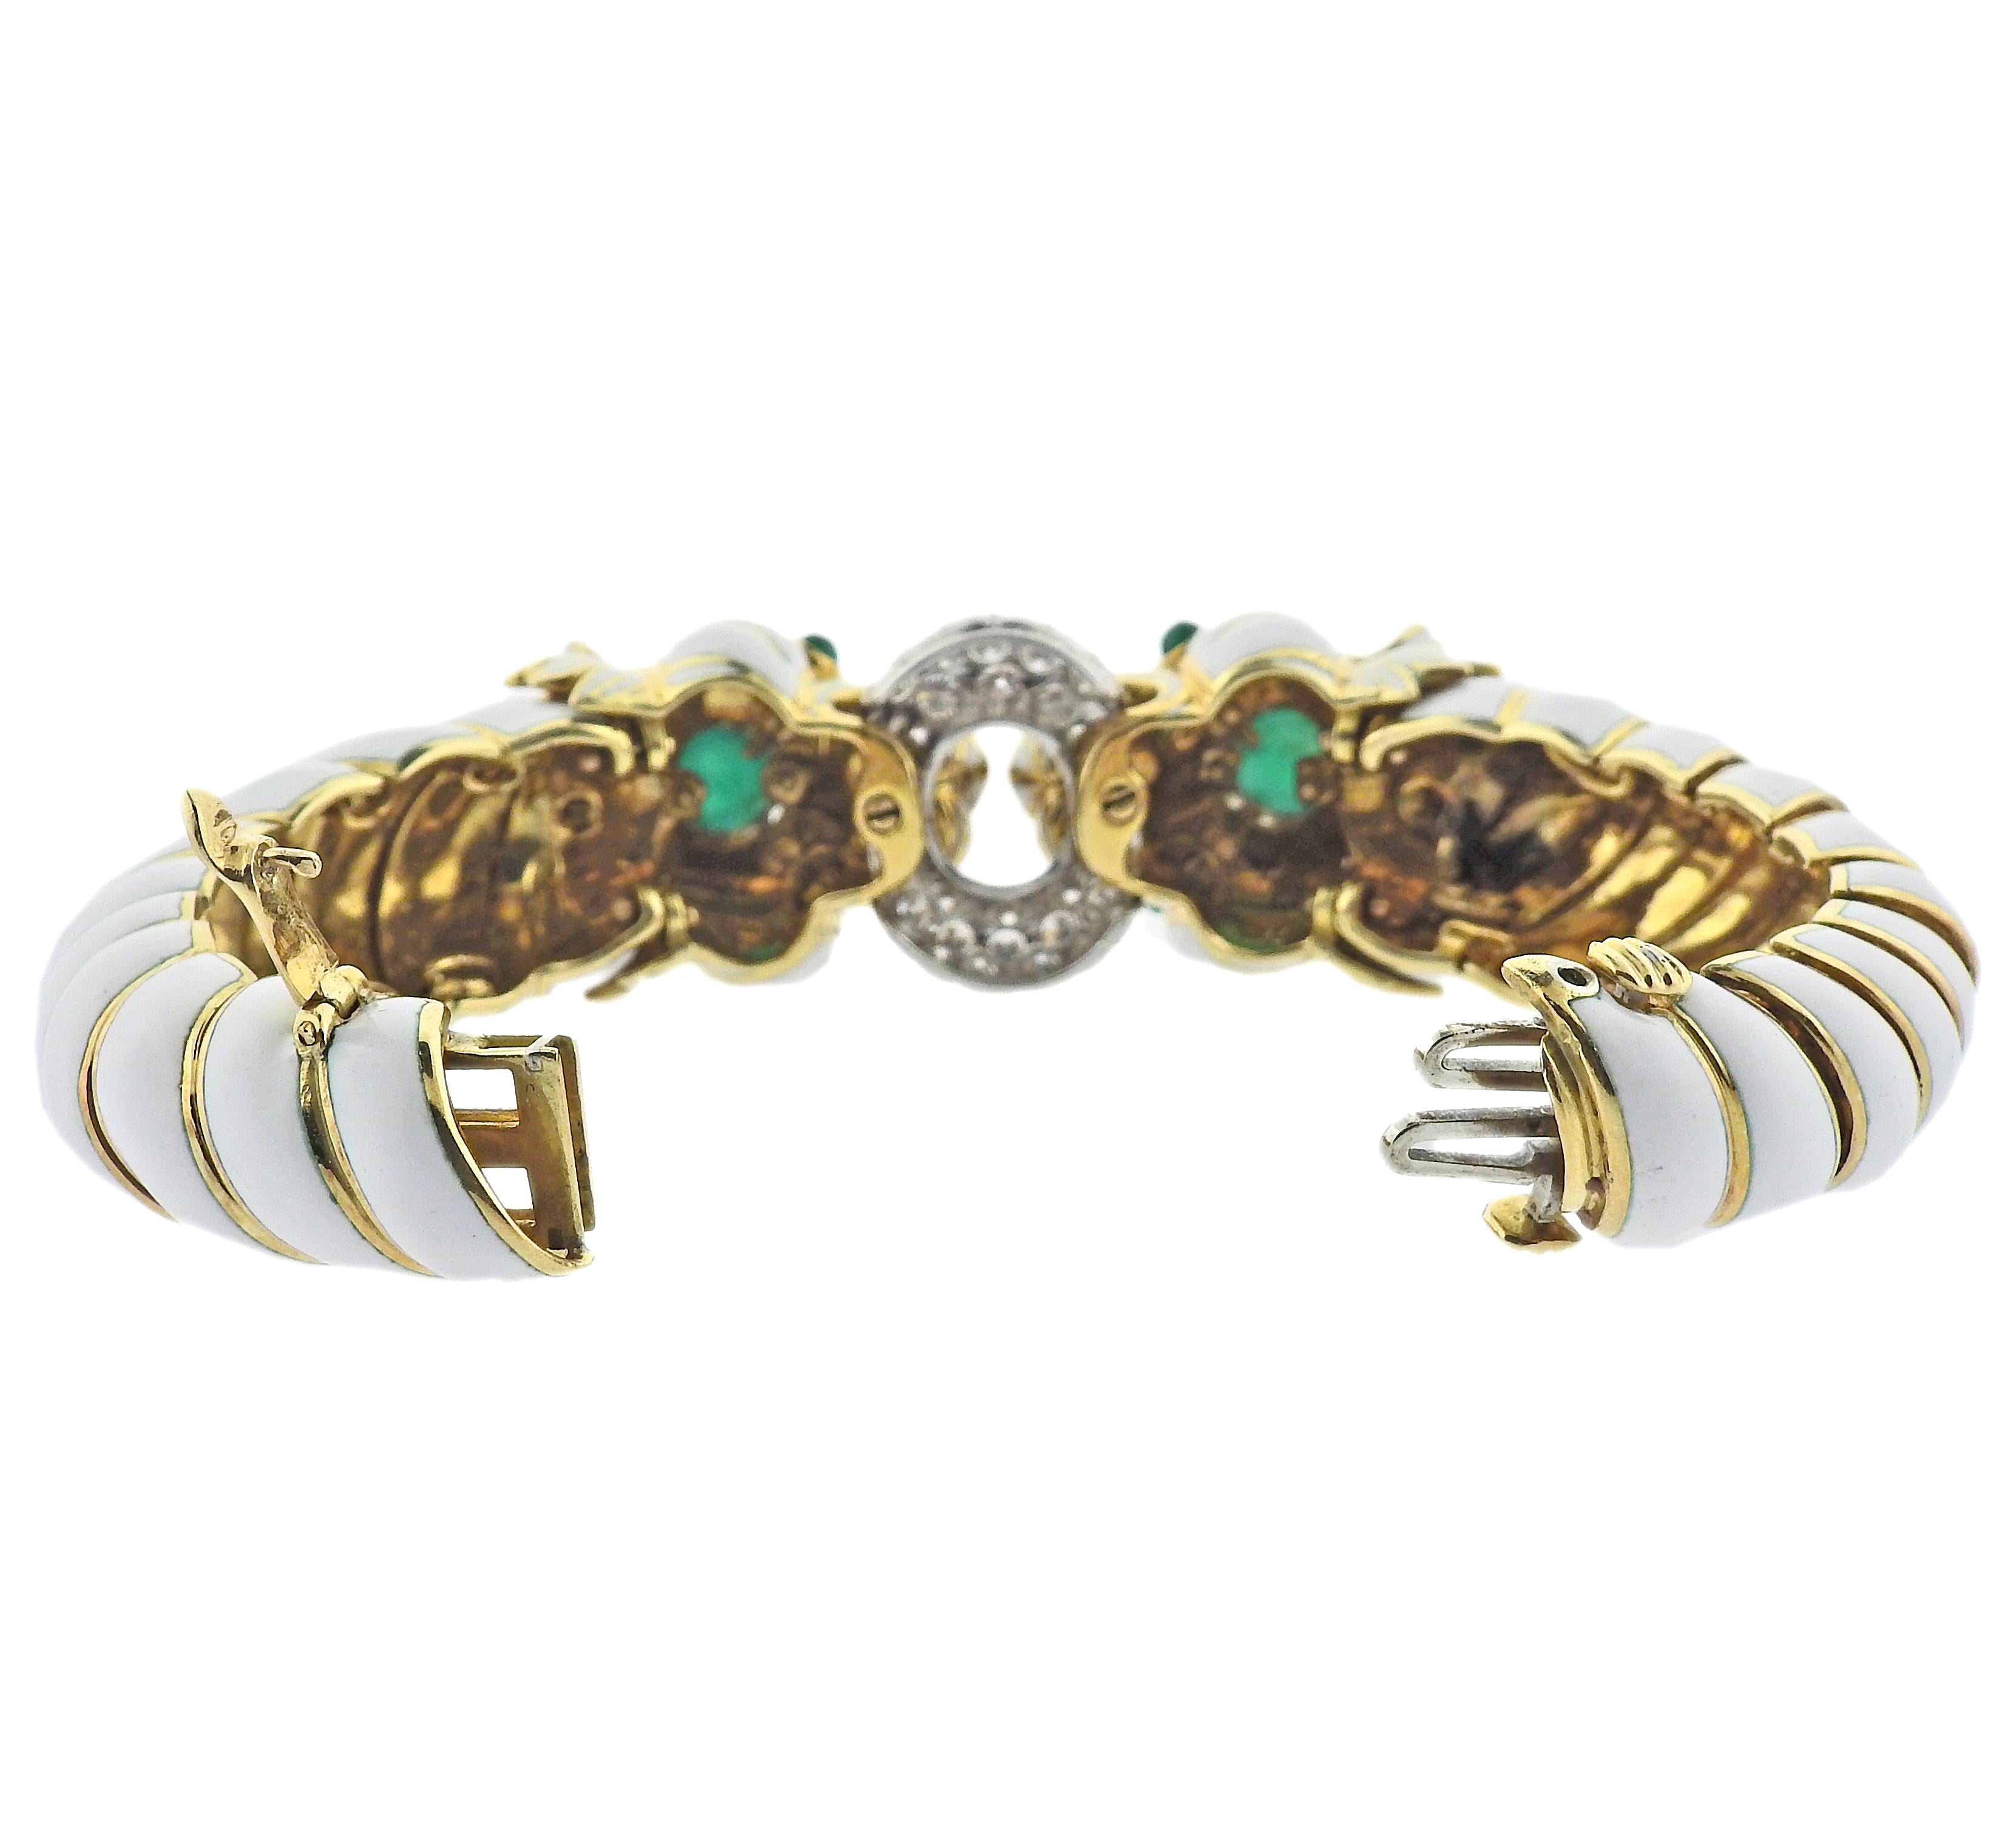 Impressive 18k gold, platinum and enamel twin lion bracelet by David Webb, set with cabochon emeralds and approx. 2.00ctw in VS/H diamonds. Bracelet will fit approx. 6.5